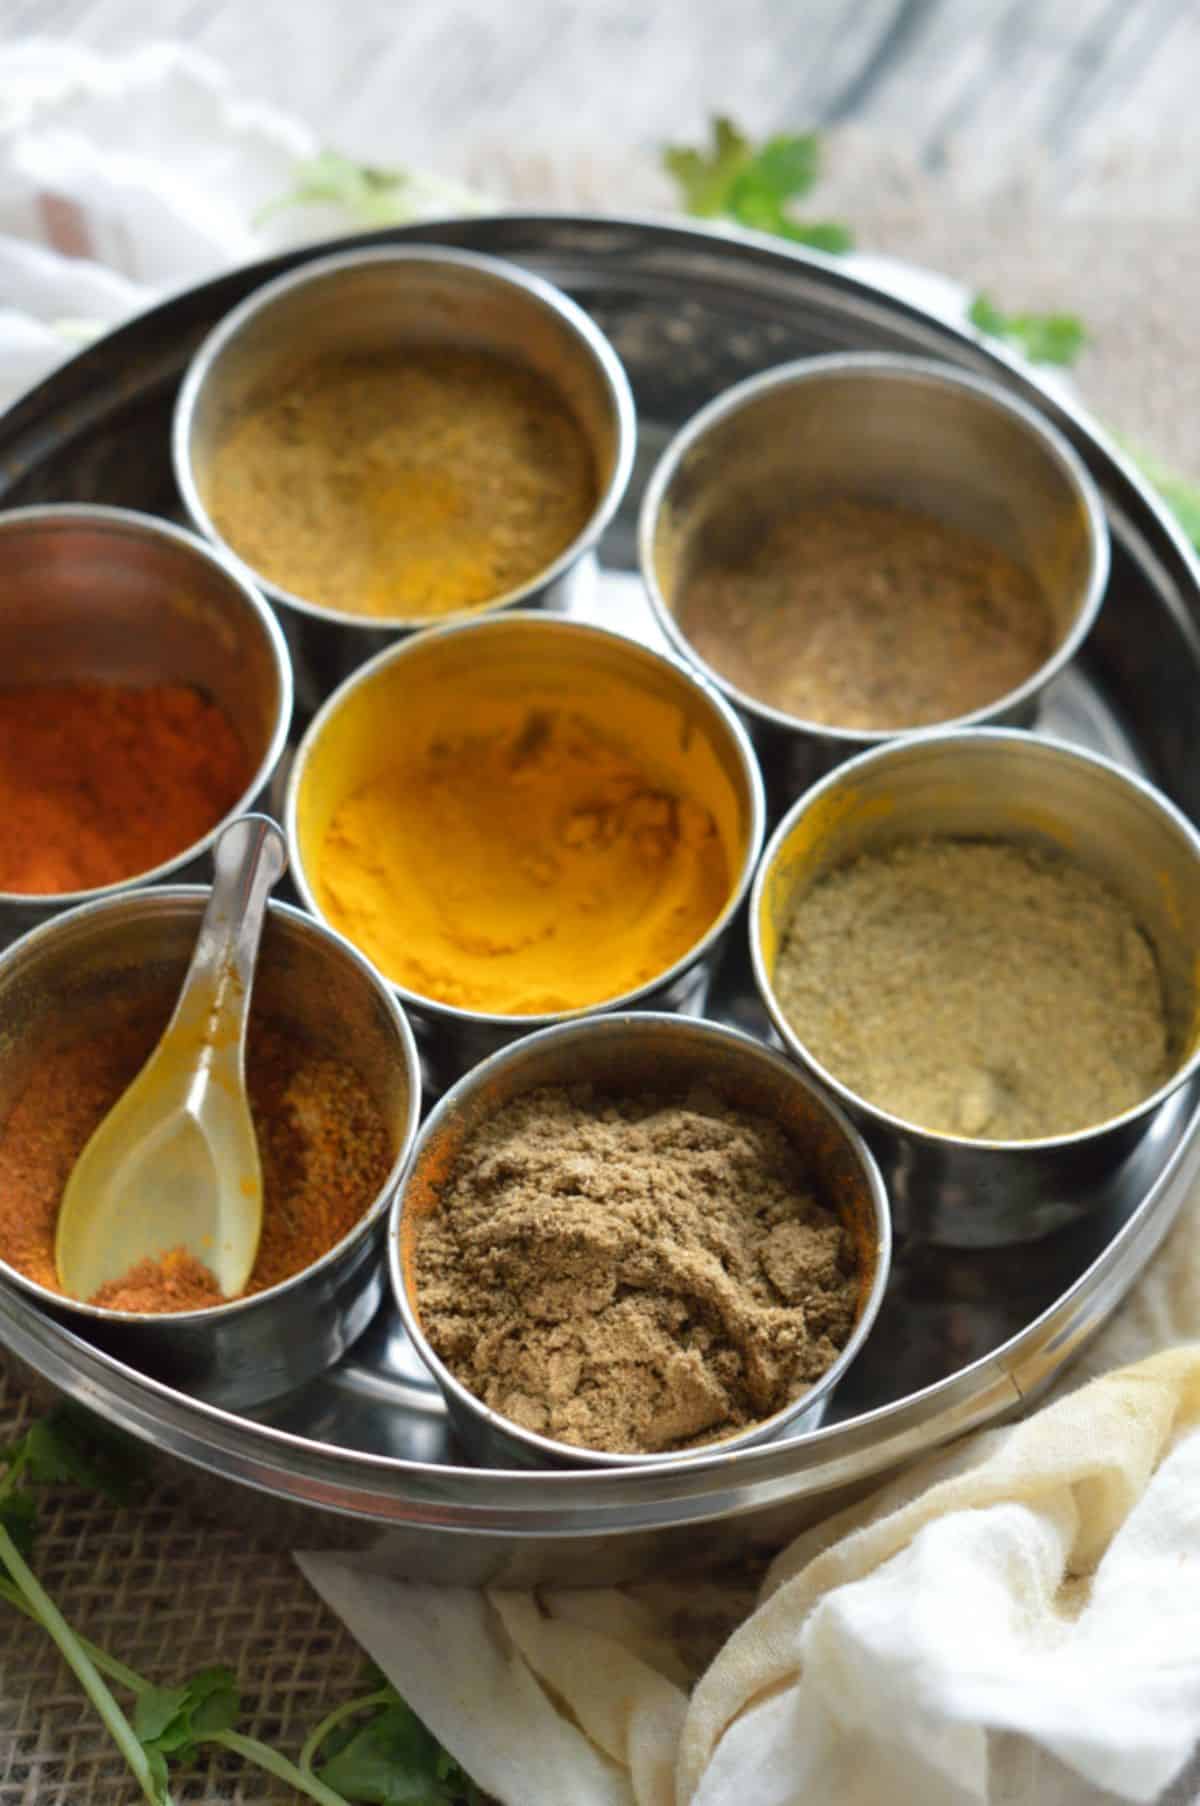 7 different spices in bowls on a tray.